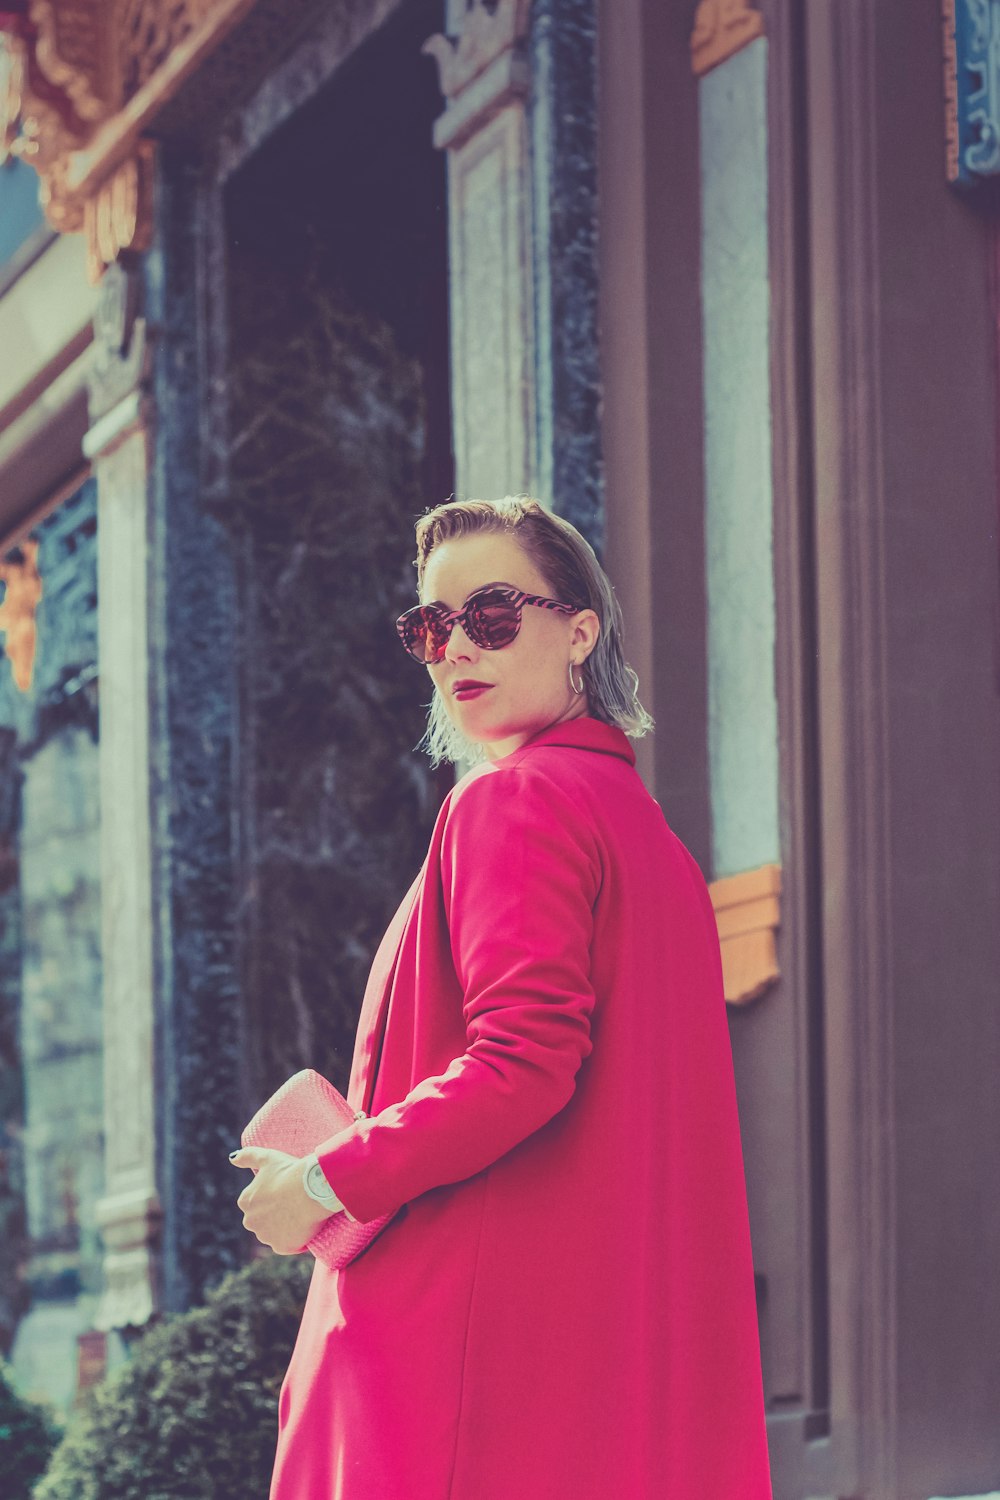 woman in red long sleeve shirt wearing sunglasses standing near brown wooden door during daytime